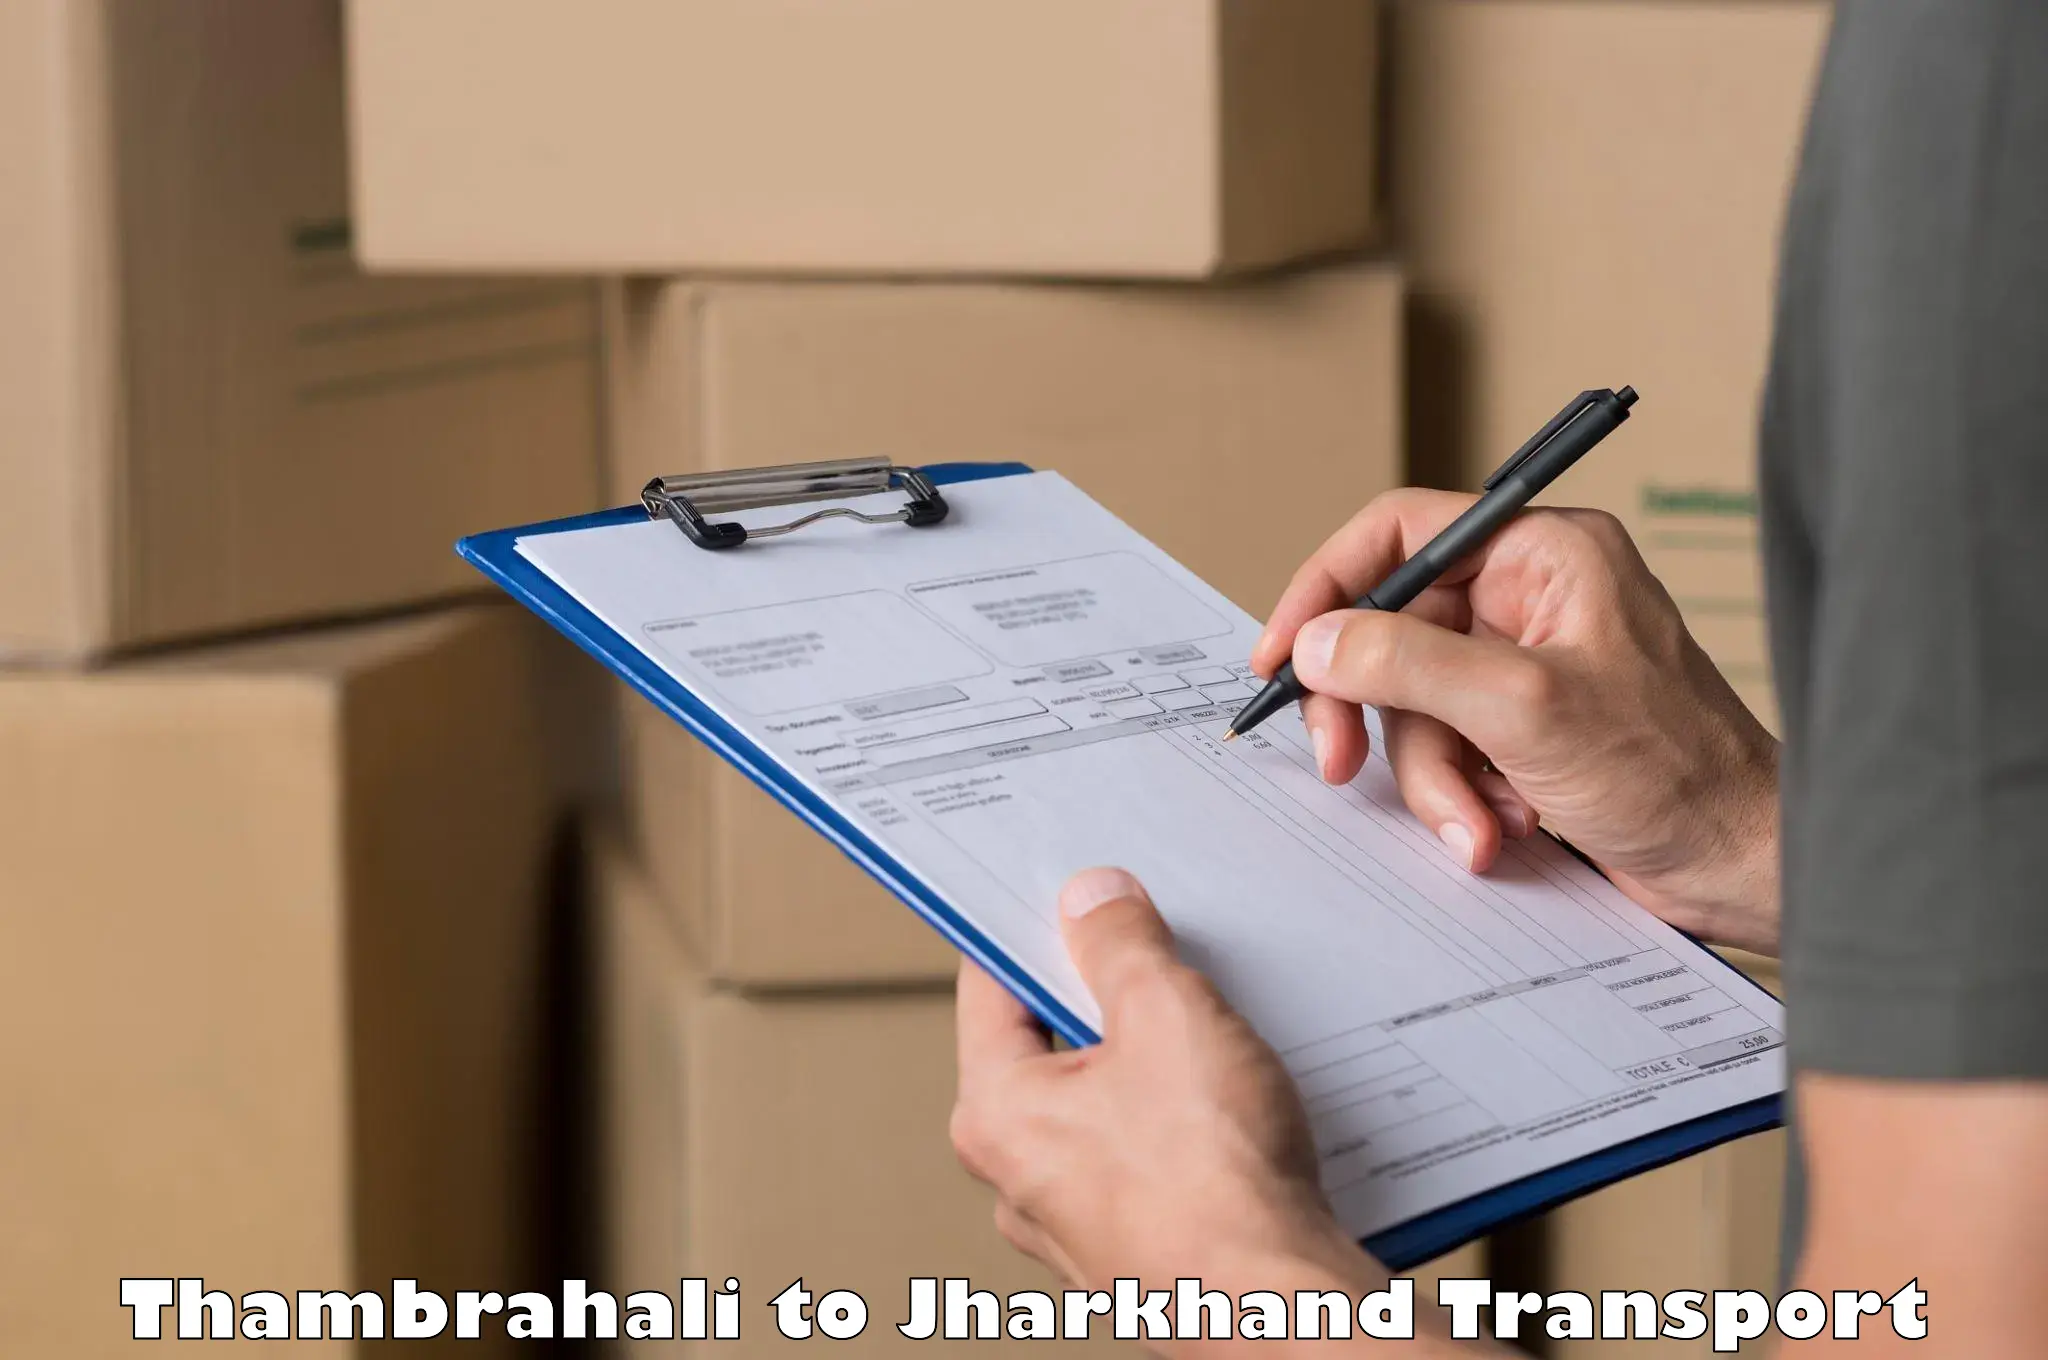 Daily parcel service transport Thambrahali to IIT Dhanbad